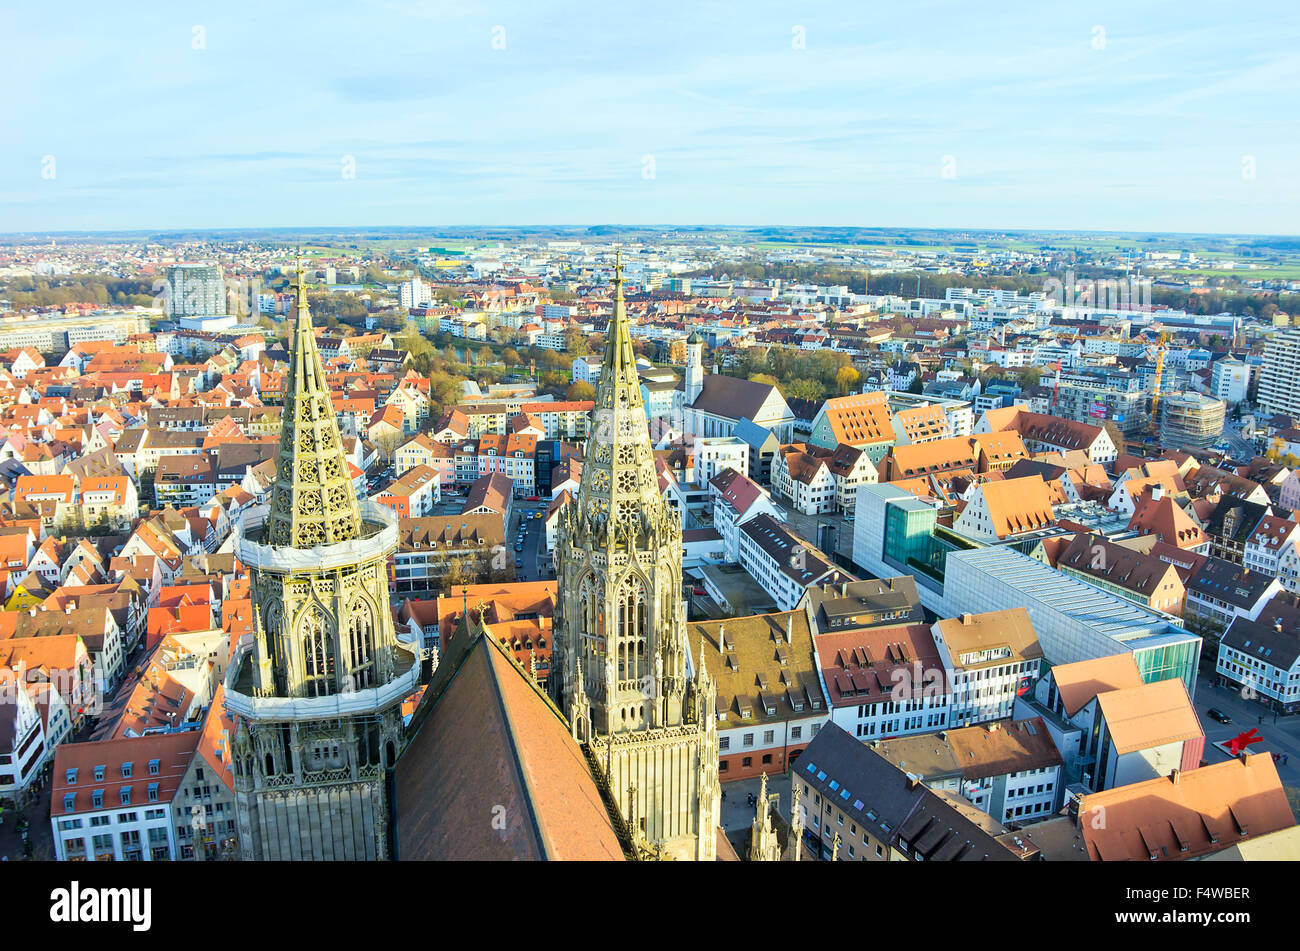 View from the Ulm Minster, Ulm, Germany. Stock Photo